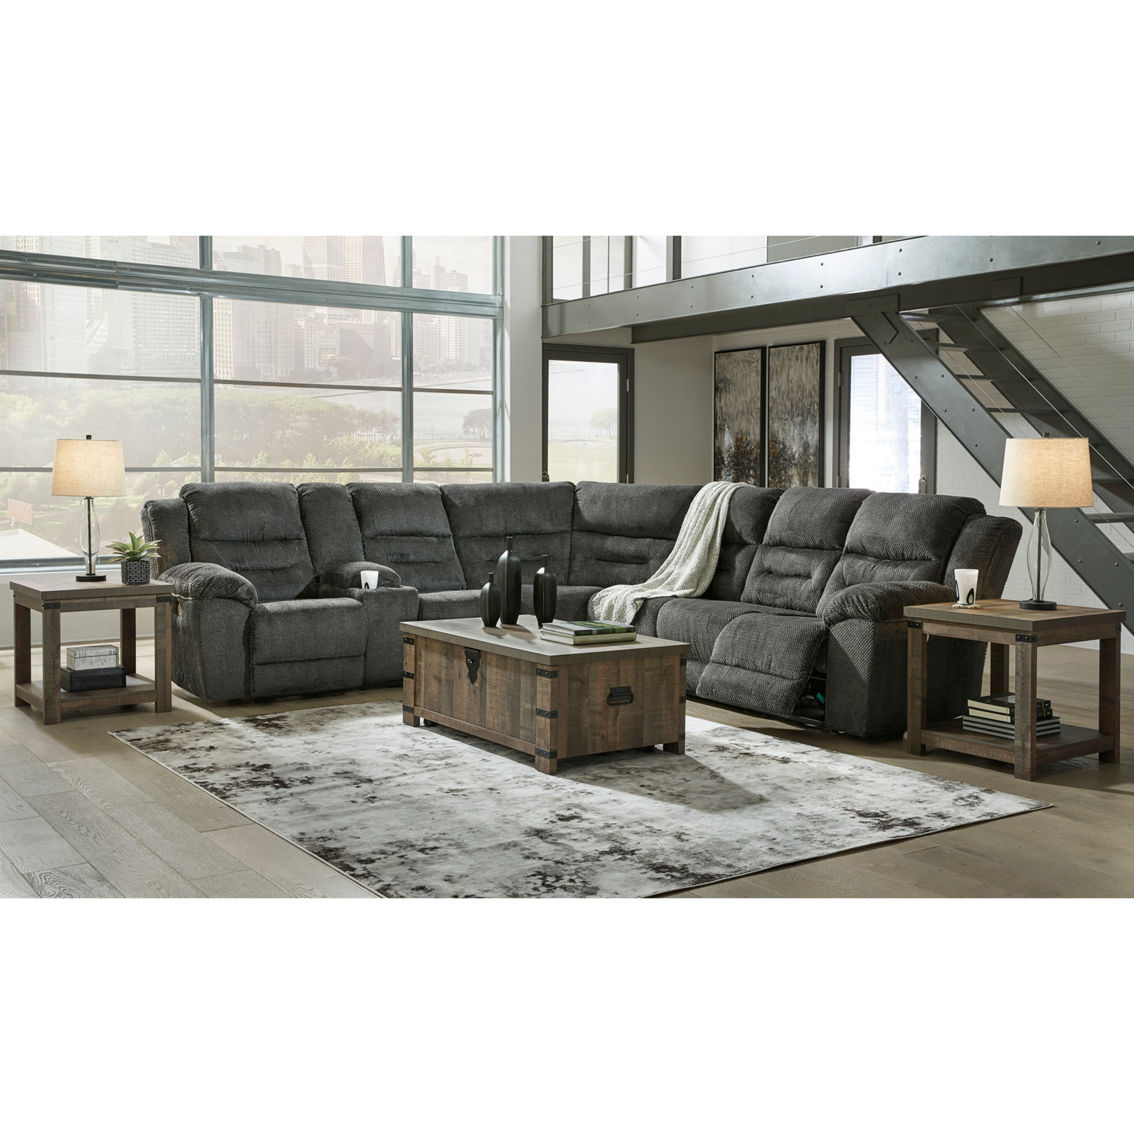 Signature Design by Ashley Nettington 4 pc. LAF Power Reclining Sectional & Console - Image 5 of 5